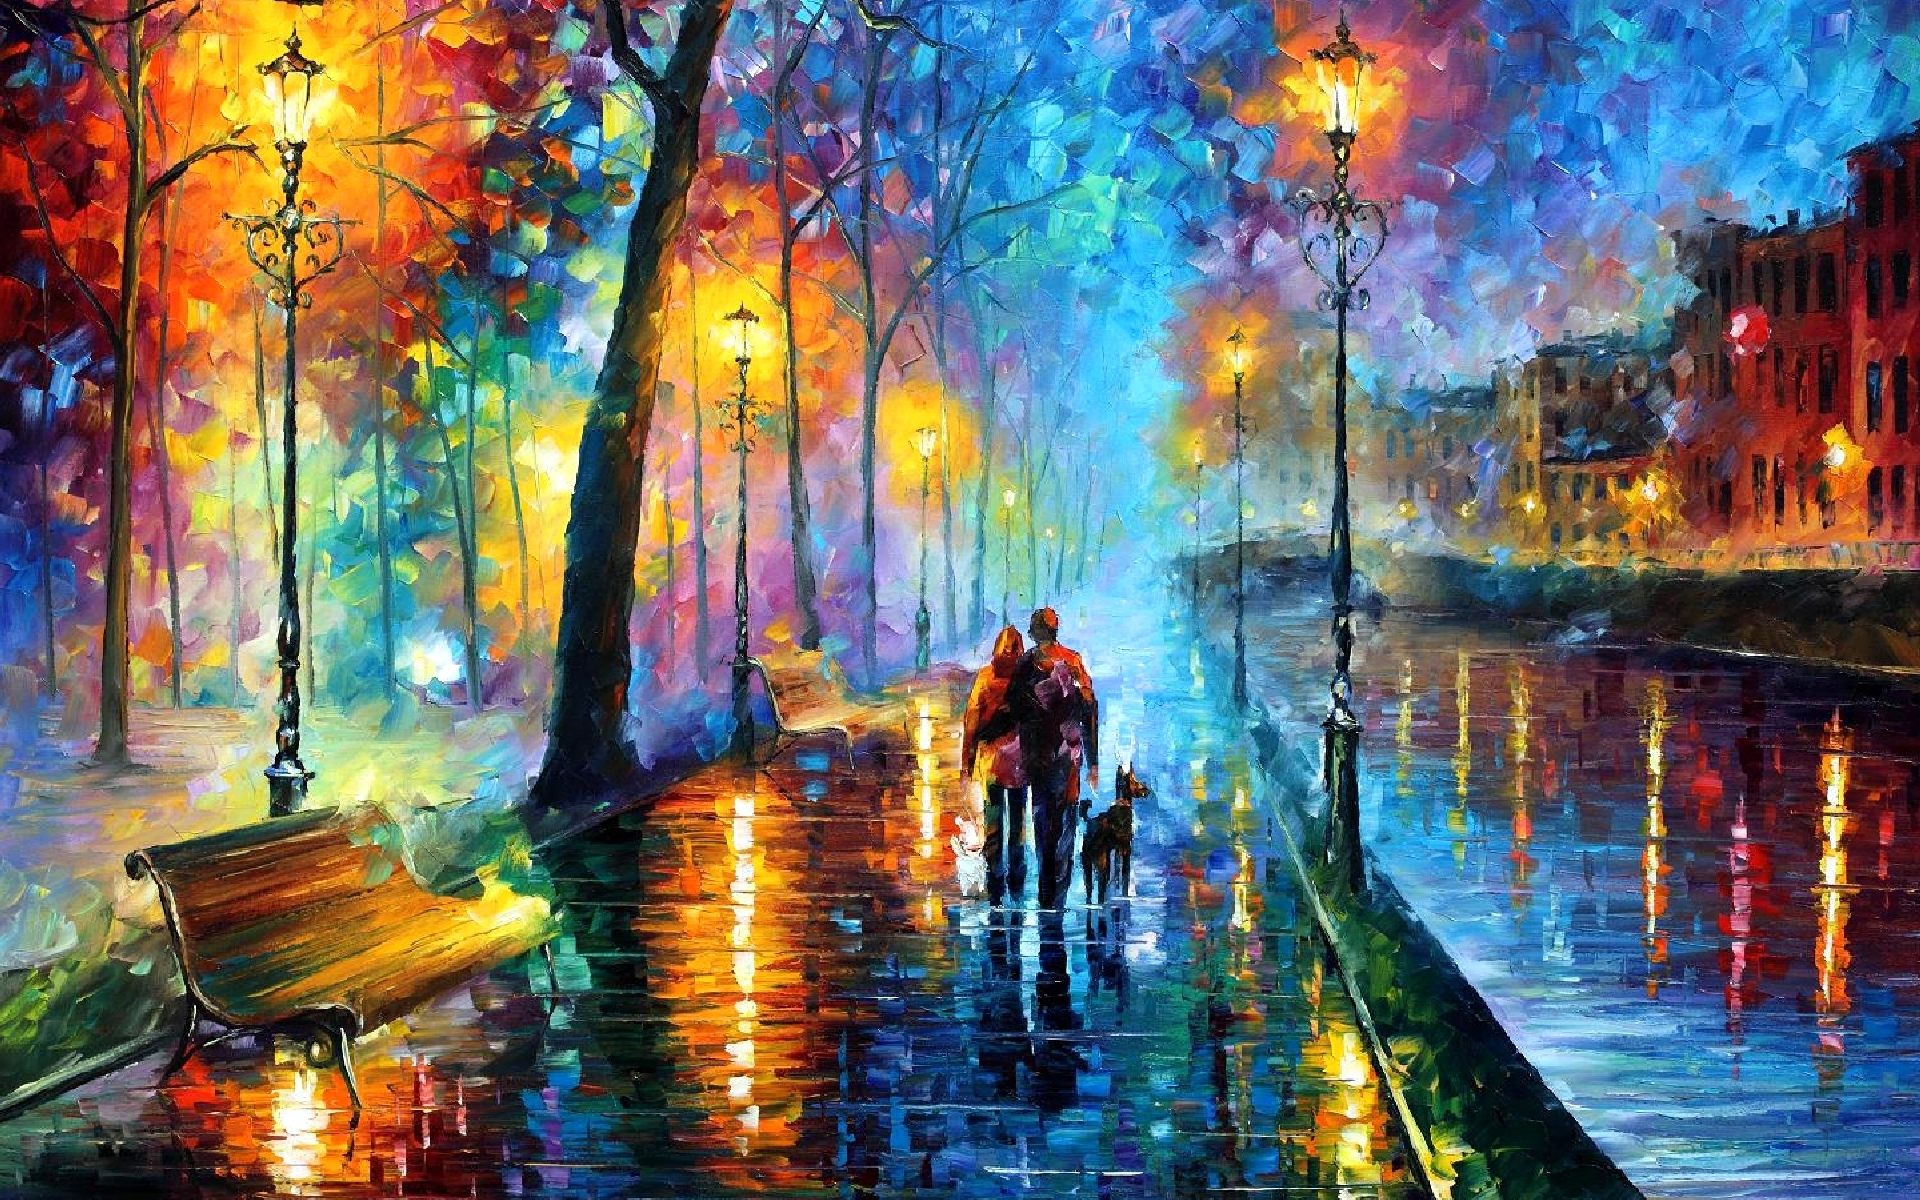 Strolling in the Park by Leonid Afremov